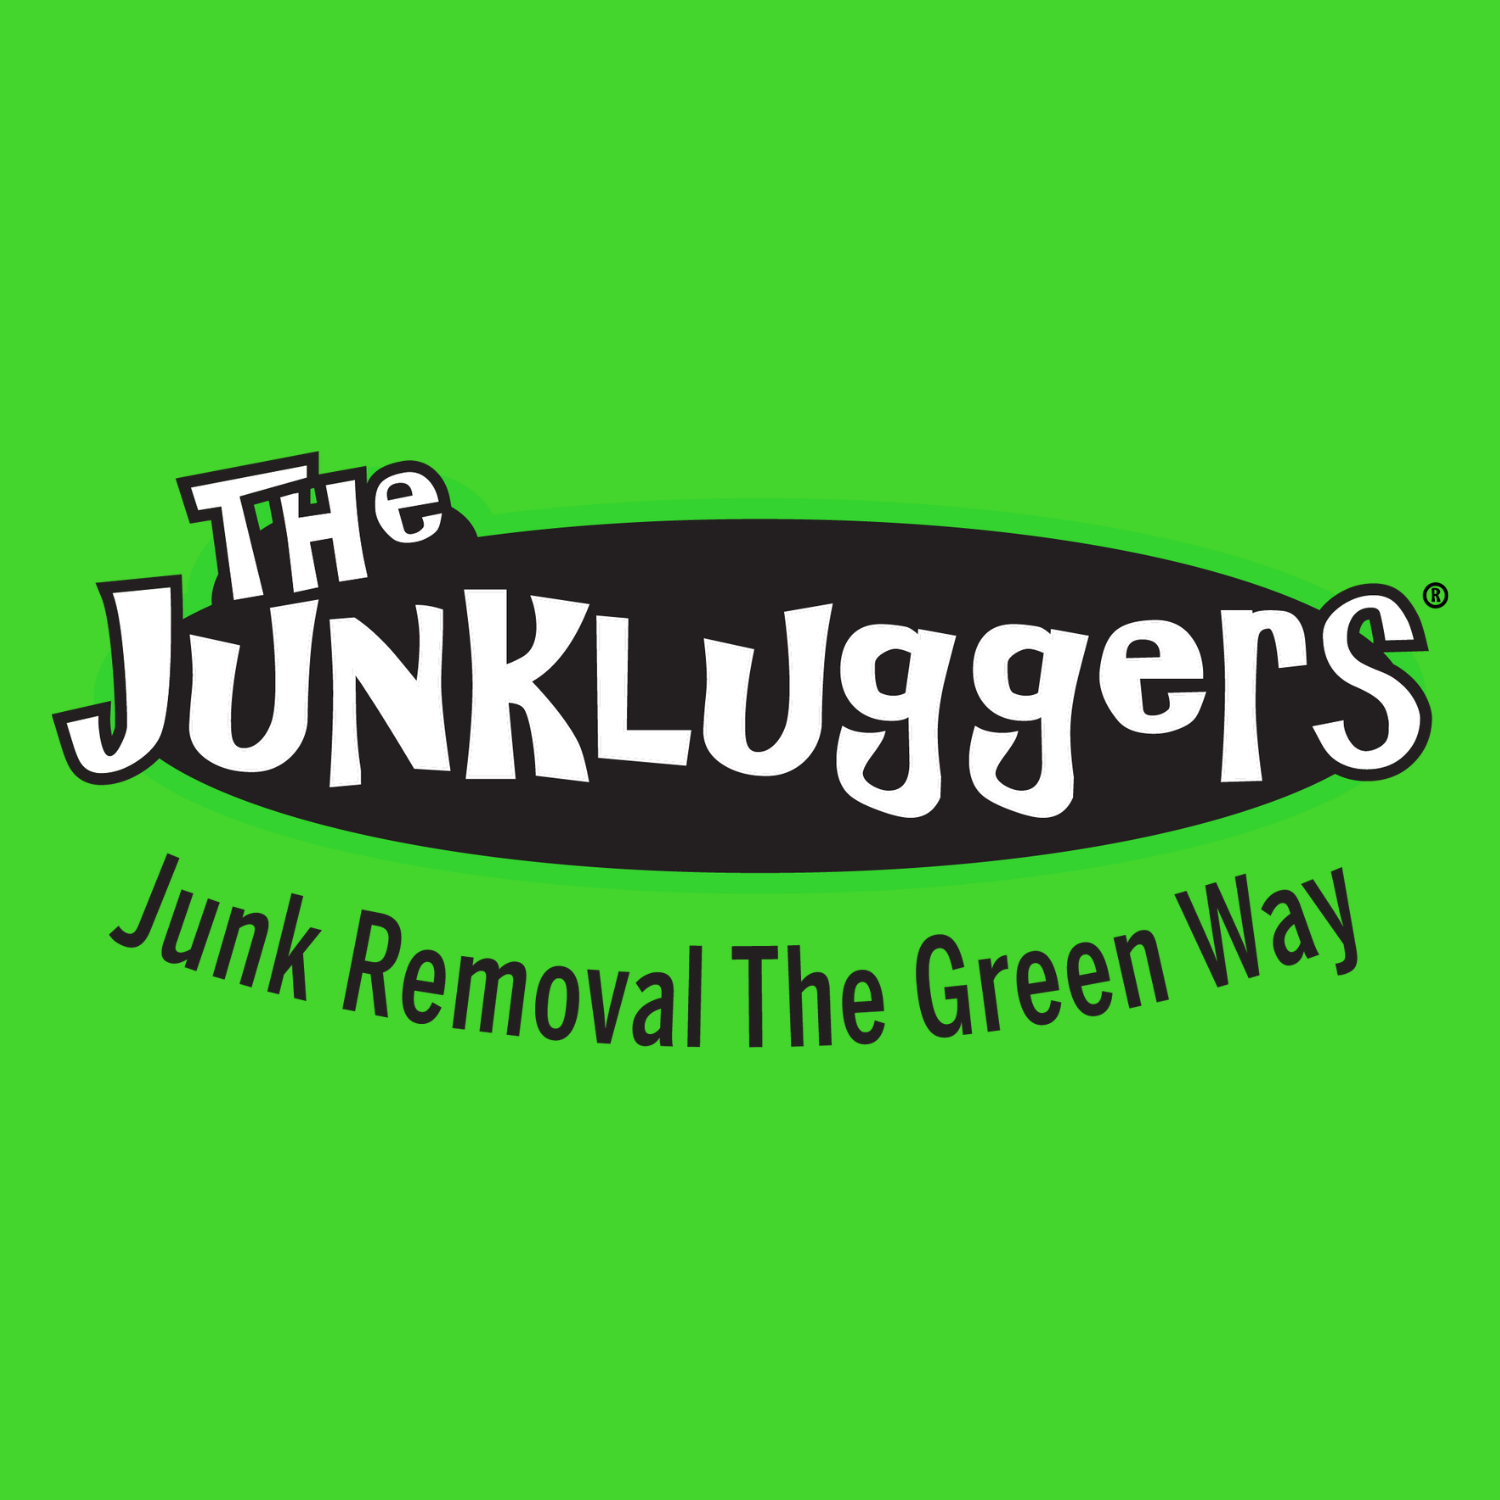 The Junkluggers of Willamette Valley Logo